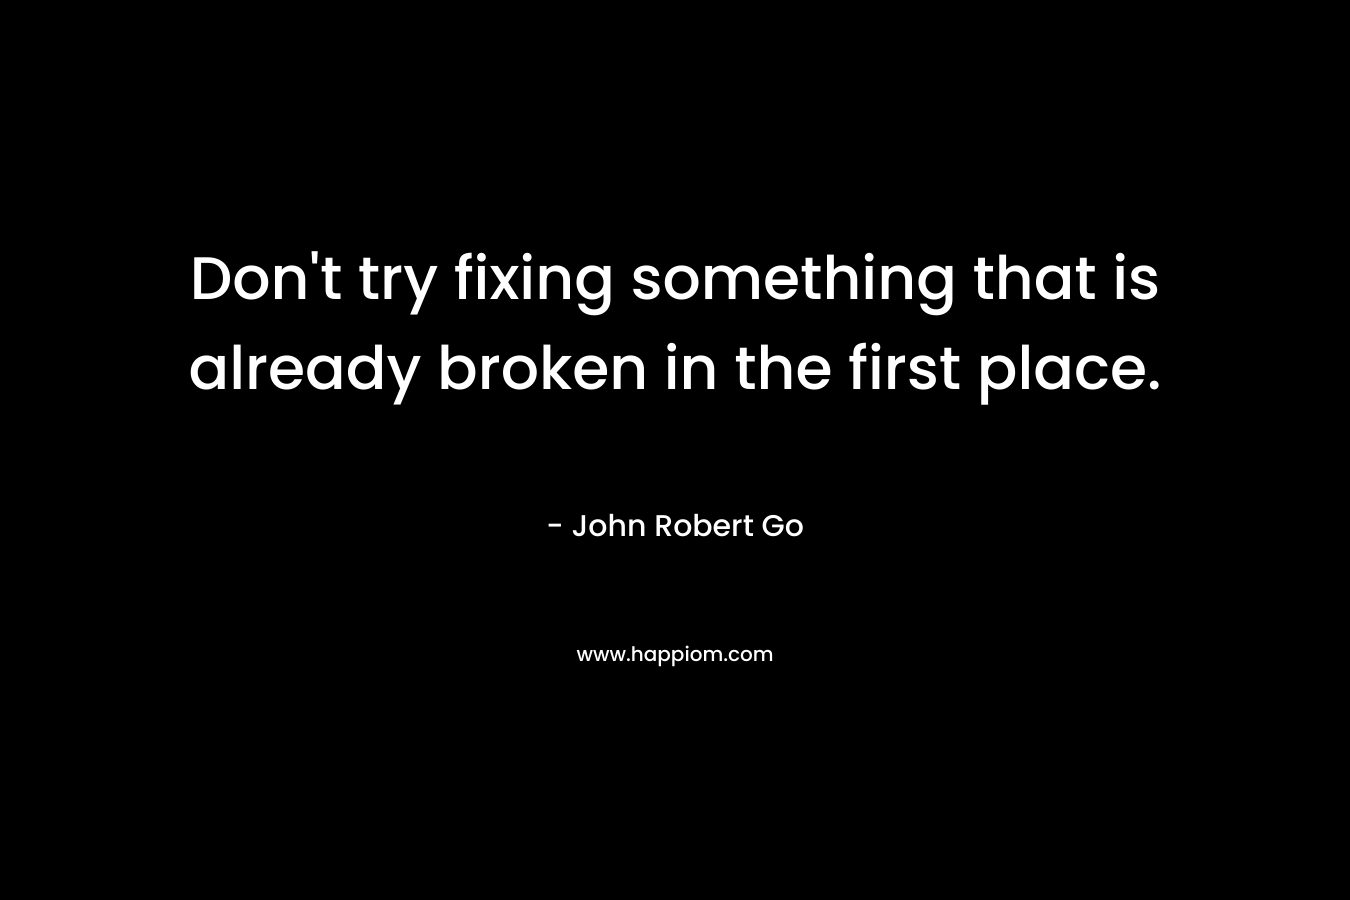 Don’t try fixing something that is already broken in the first place. – John Robert Go